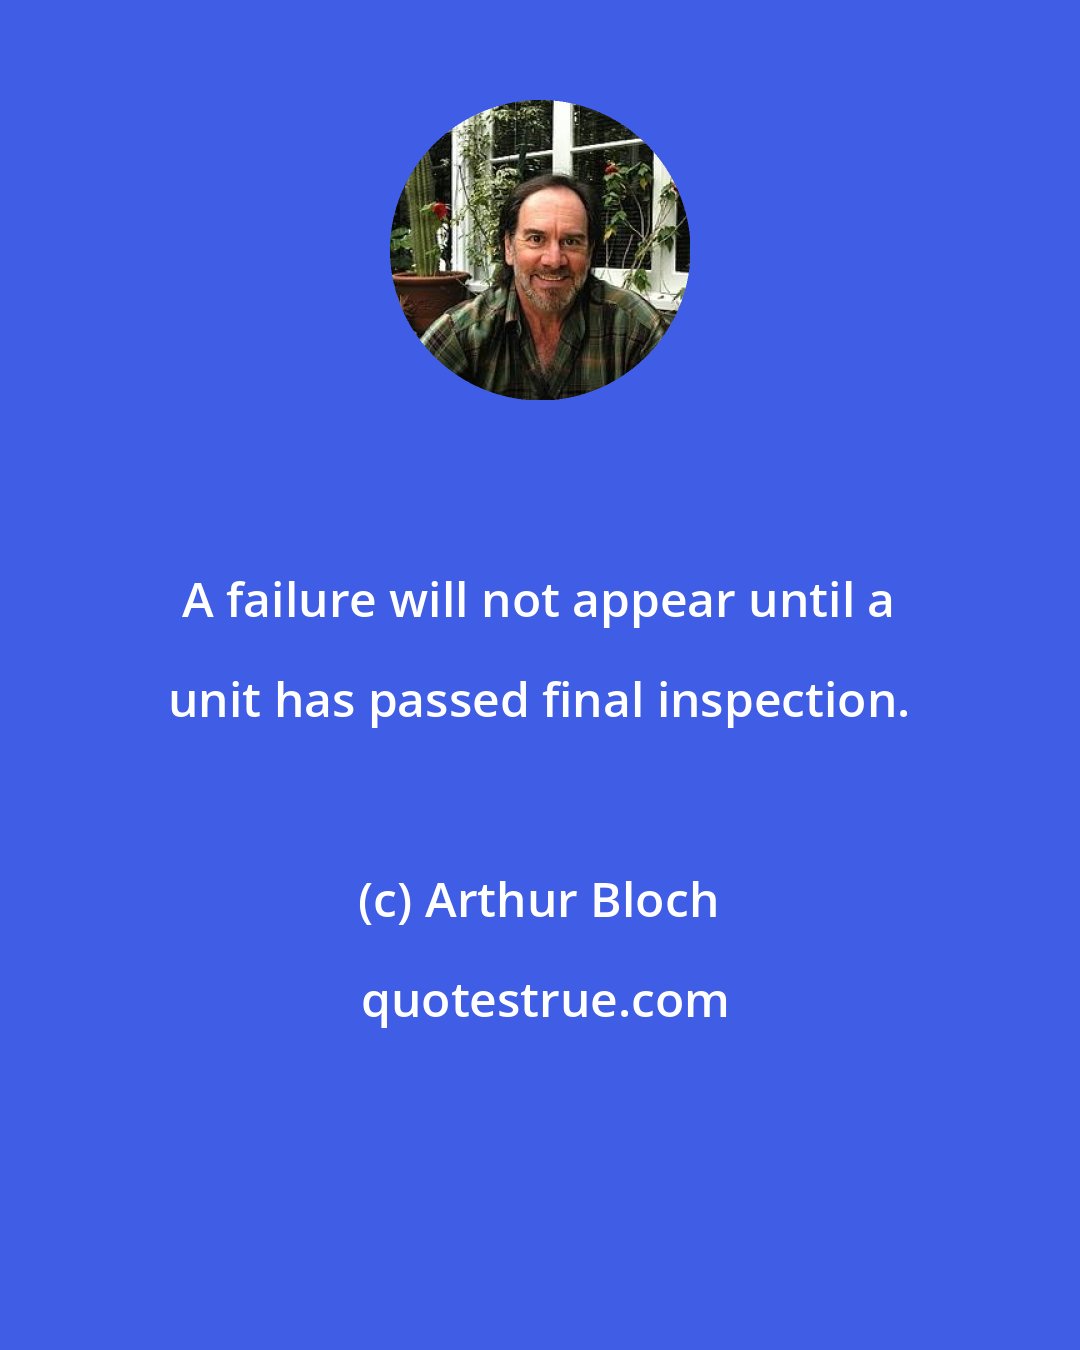 Arthur Bloch: A failure will not appear until a unit has passed final inspection.